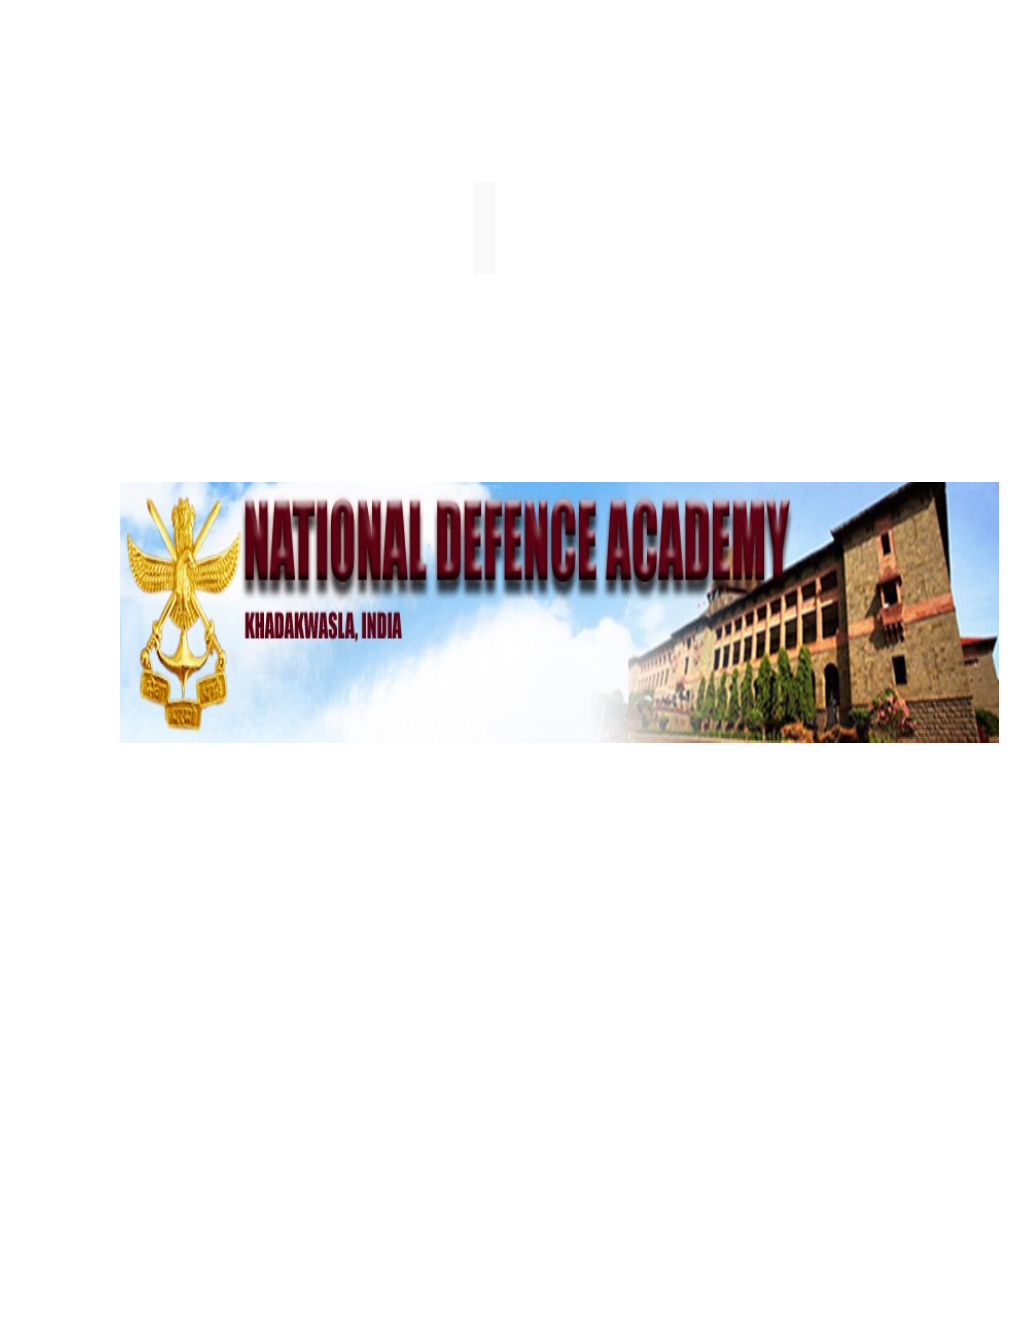 Sudan Blockof the National Defence Academy